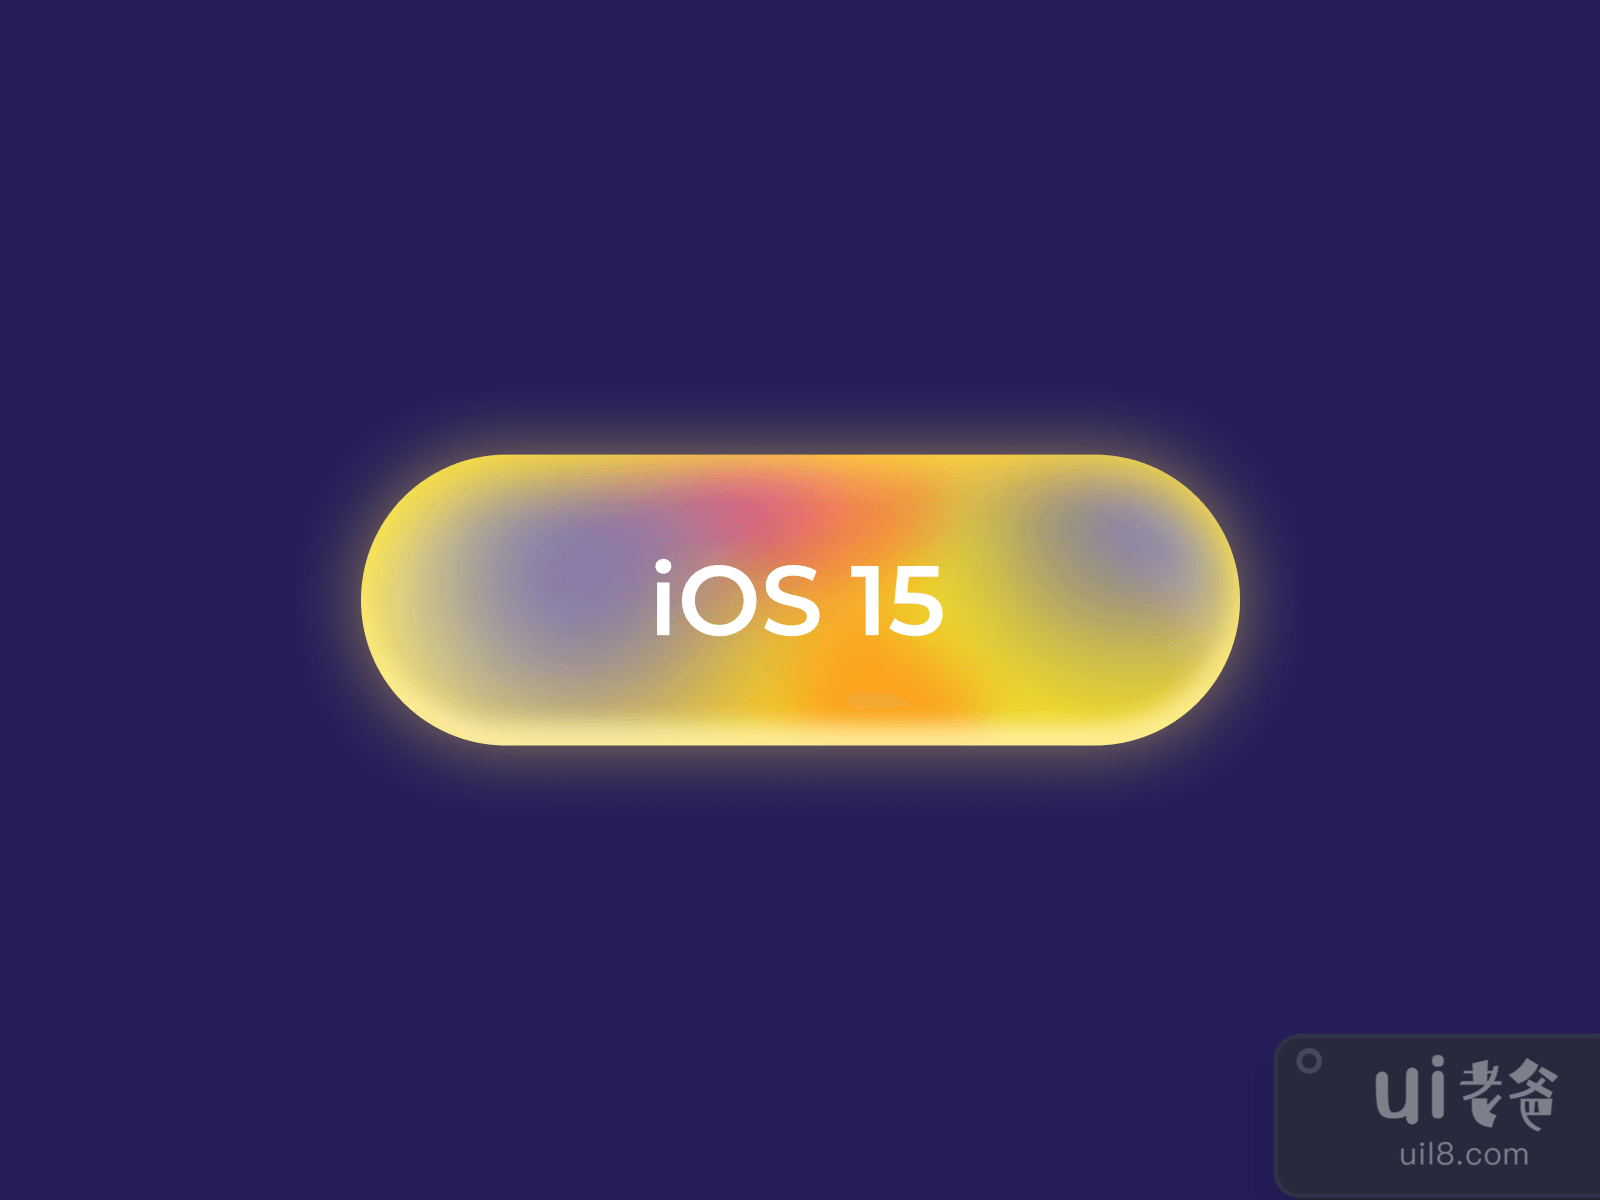 iOS 15 Button for Figma and Adobe XD No 3